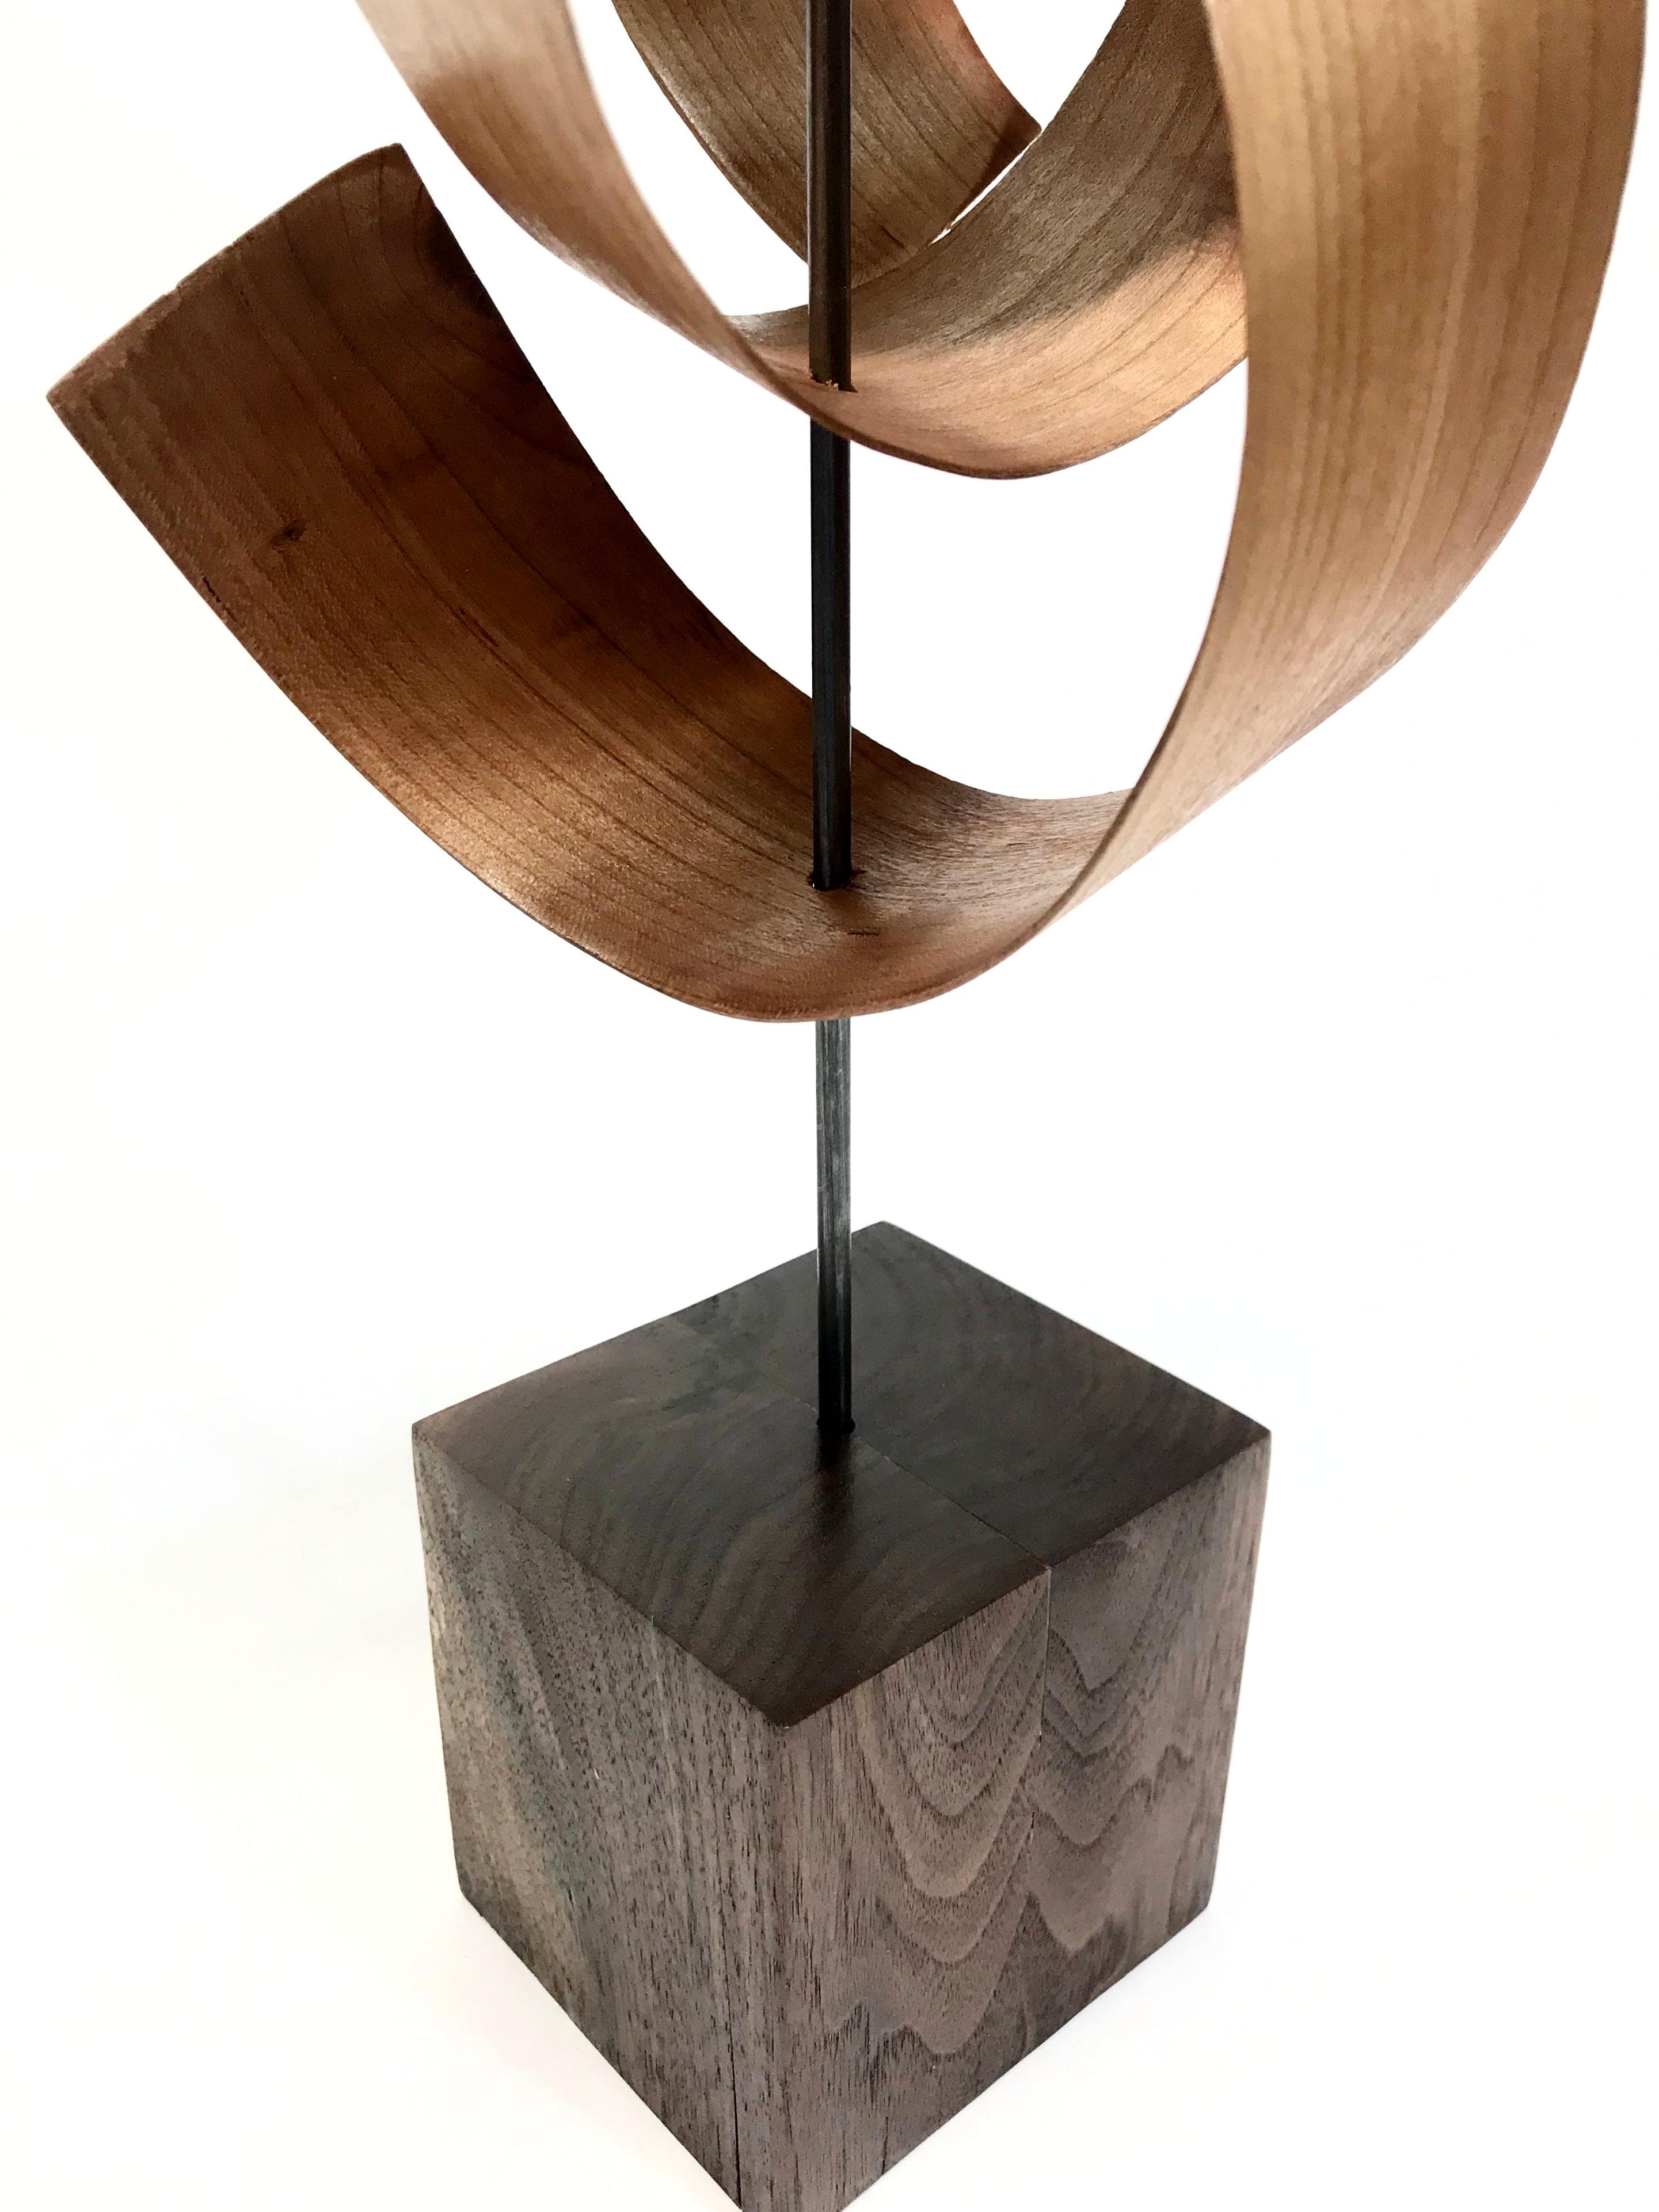 Wood Sculpture by Jeff L., Mid-Century Modern Inspired, Contemporary Abstract 2